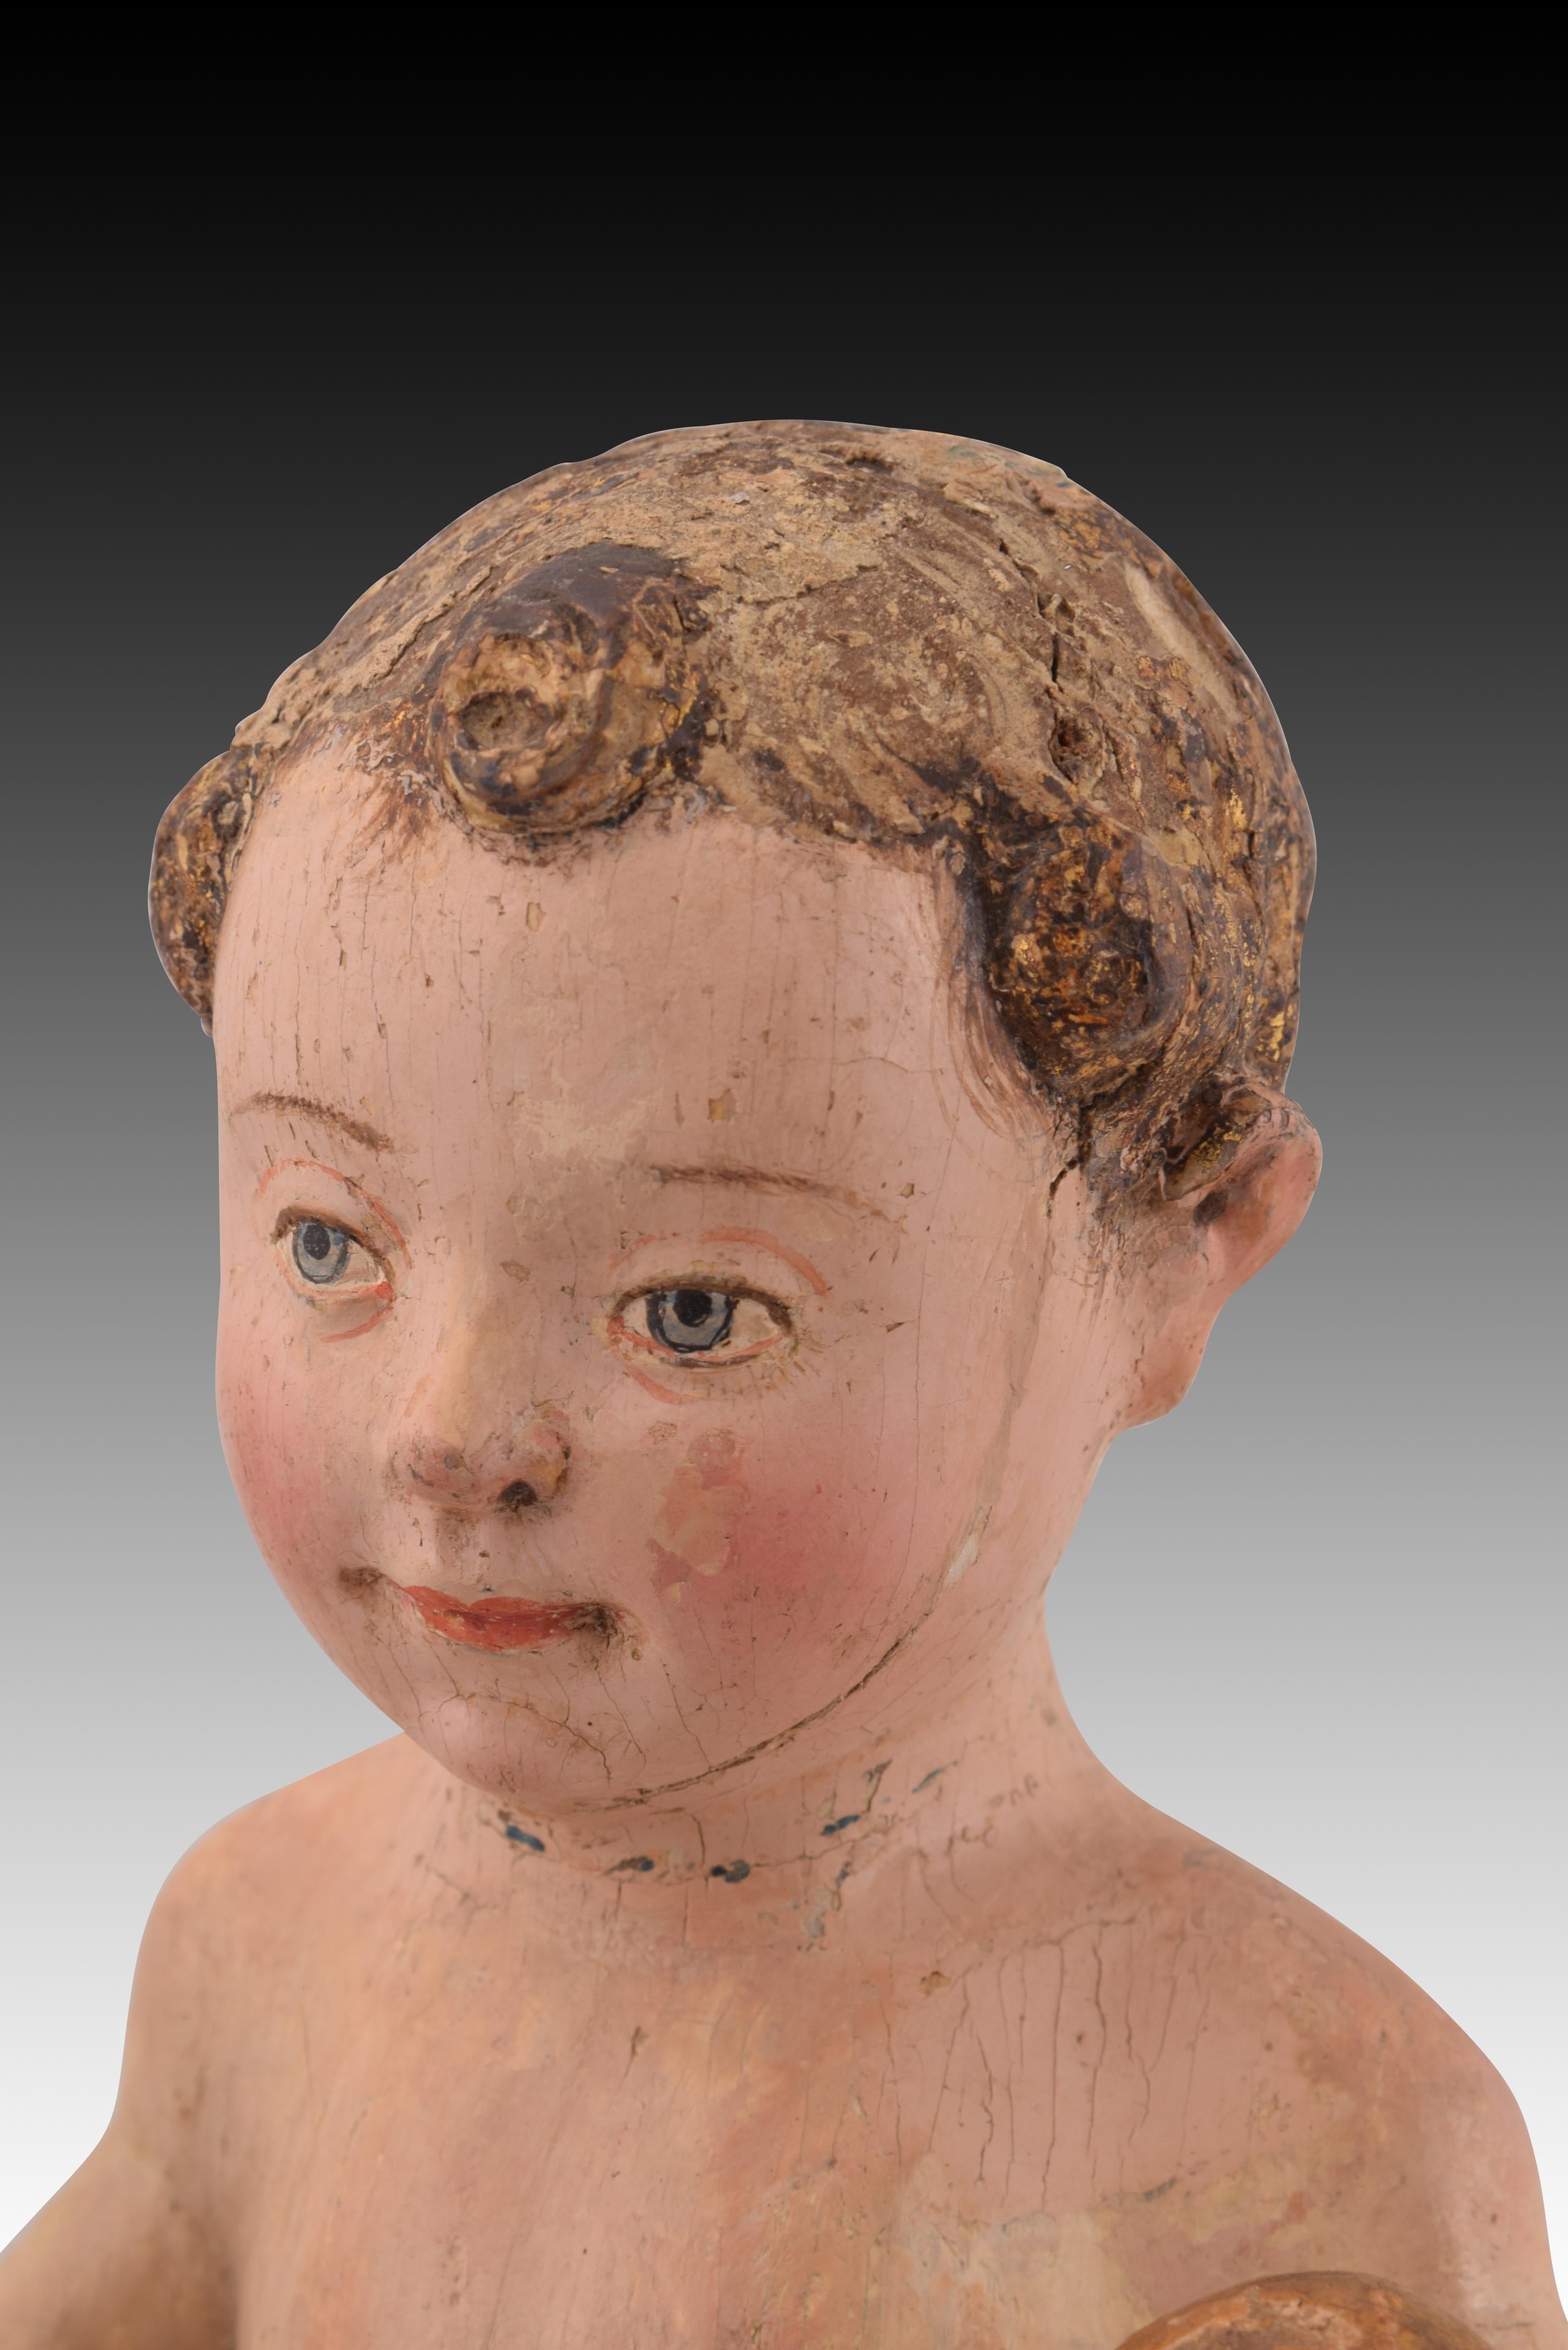 Christ Child blessing. Wood. Flemish school, 16th century with restorations. 2